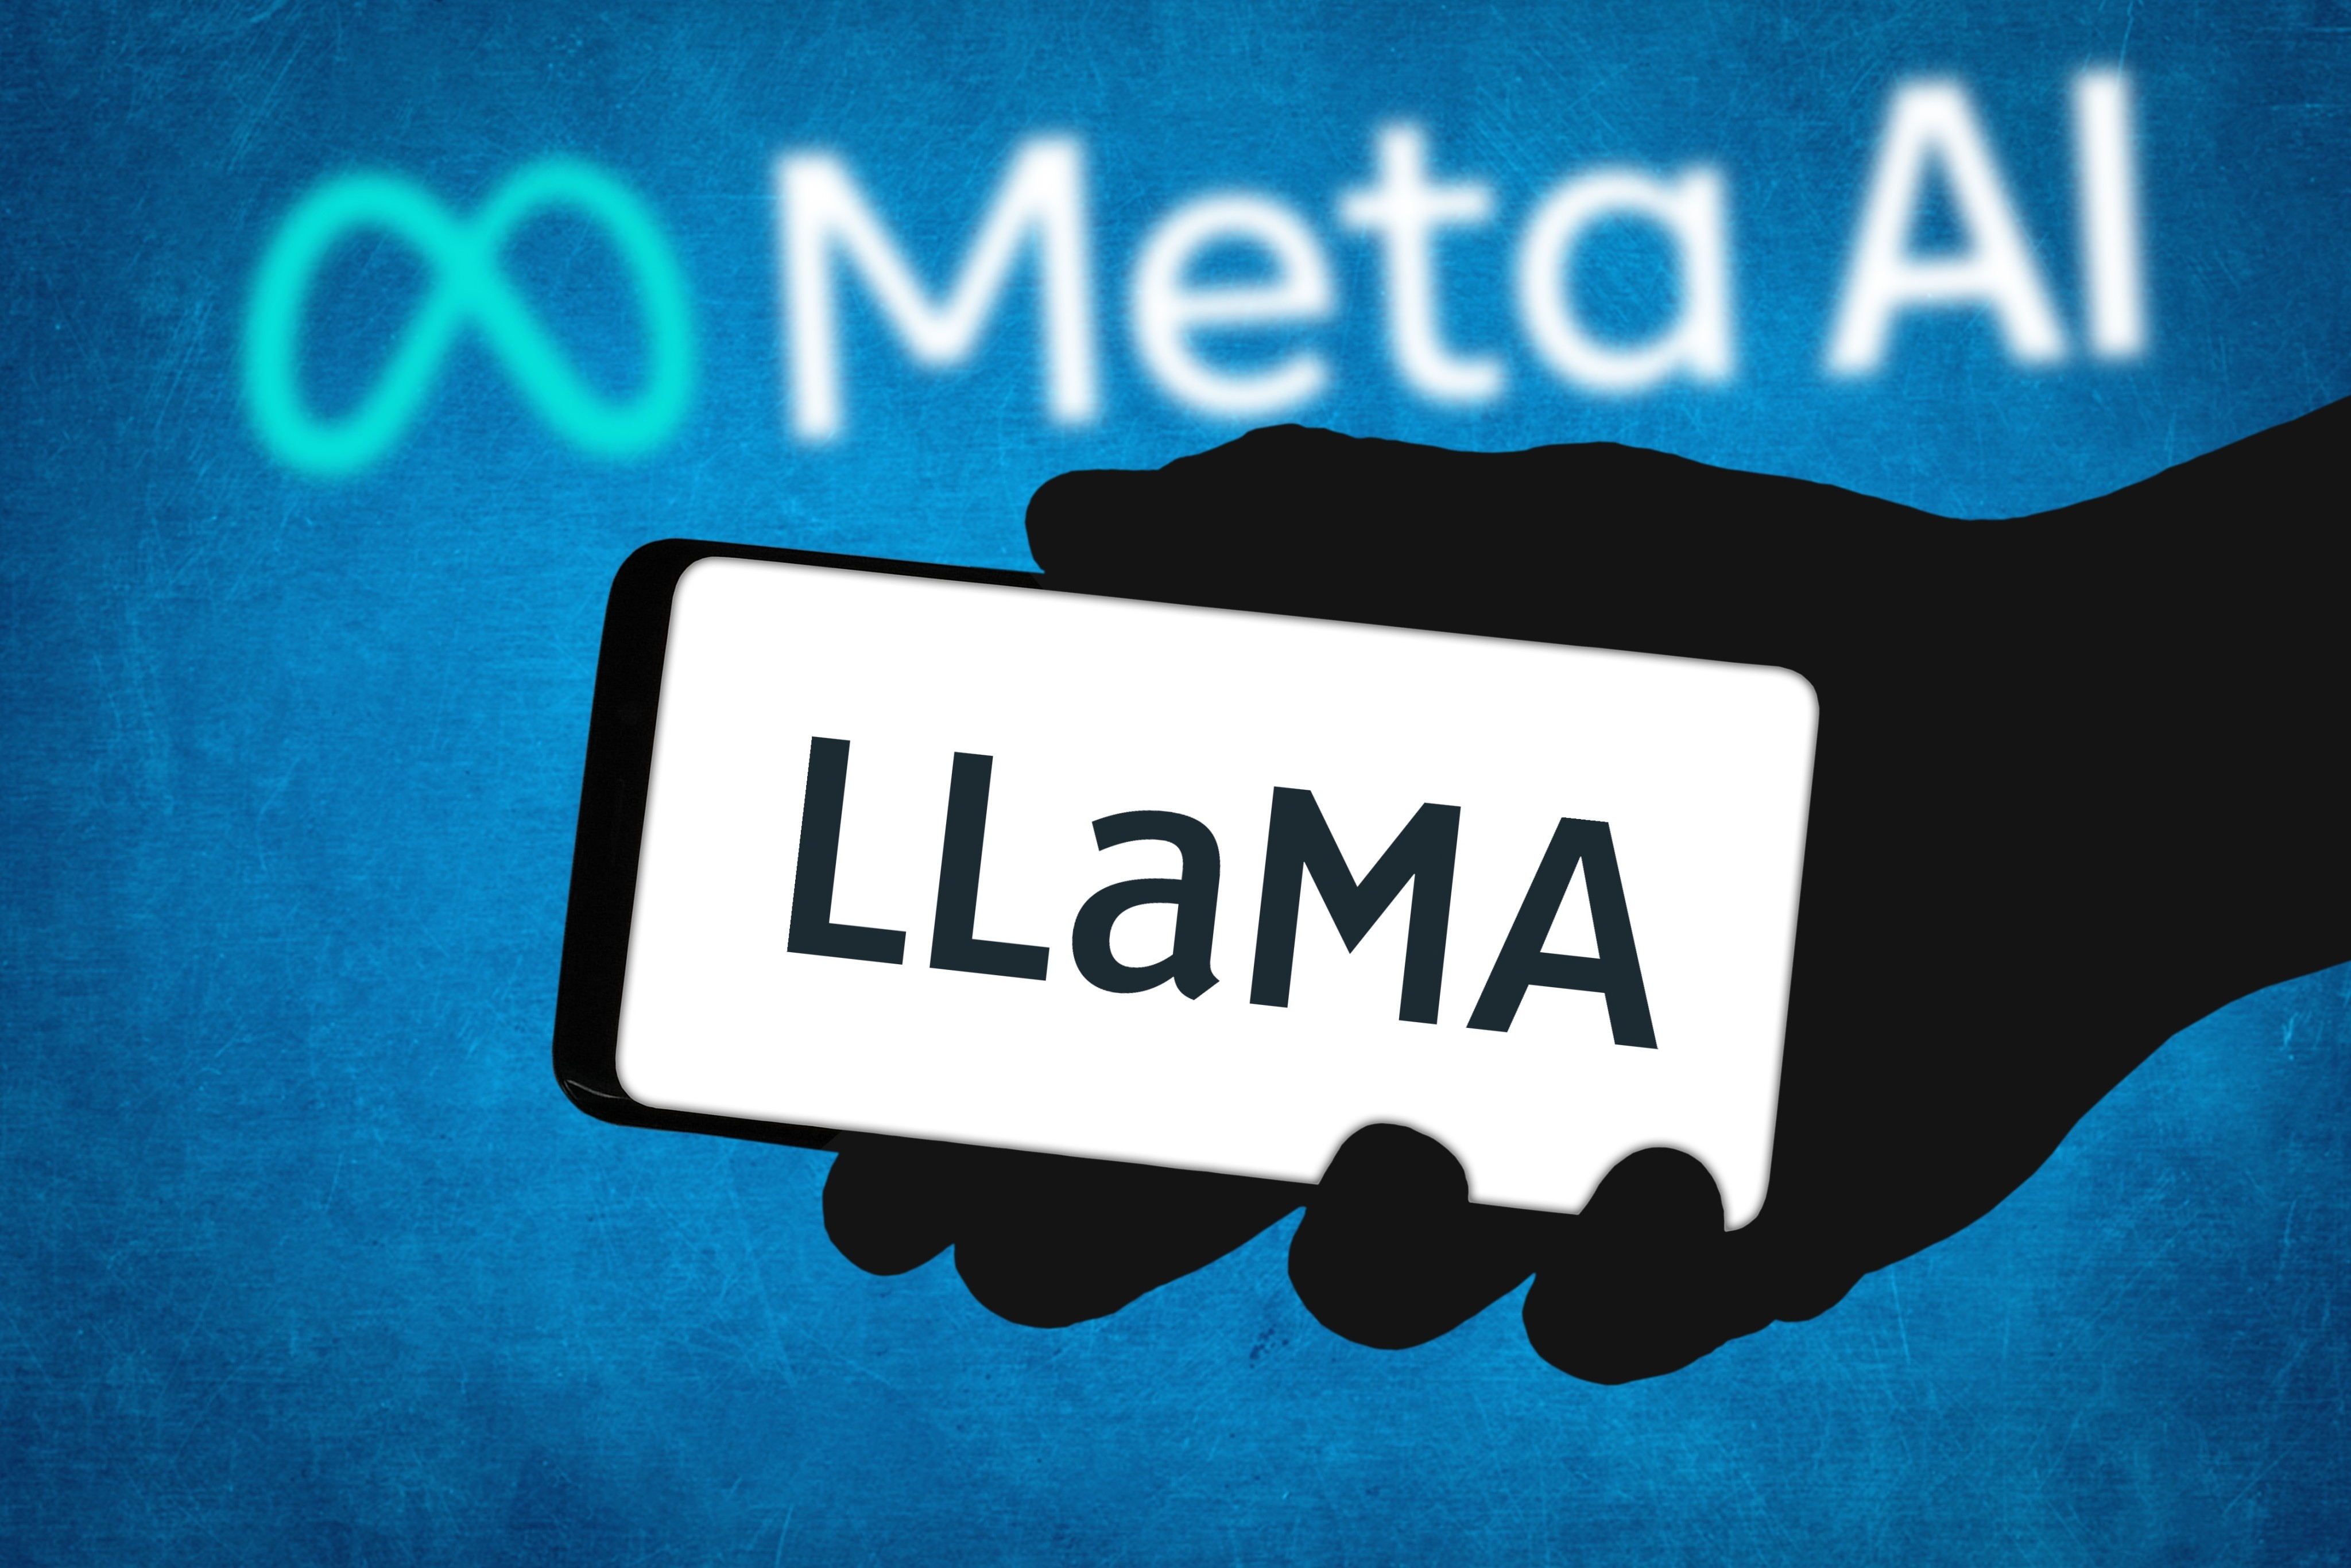 A concept illustration showing Meta’s Llama LLM for AI development. Photo: Shutterstock Images